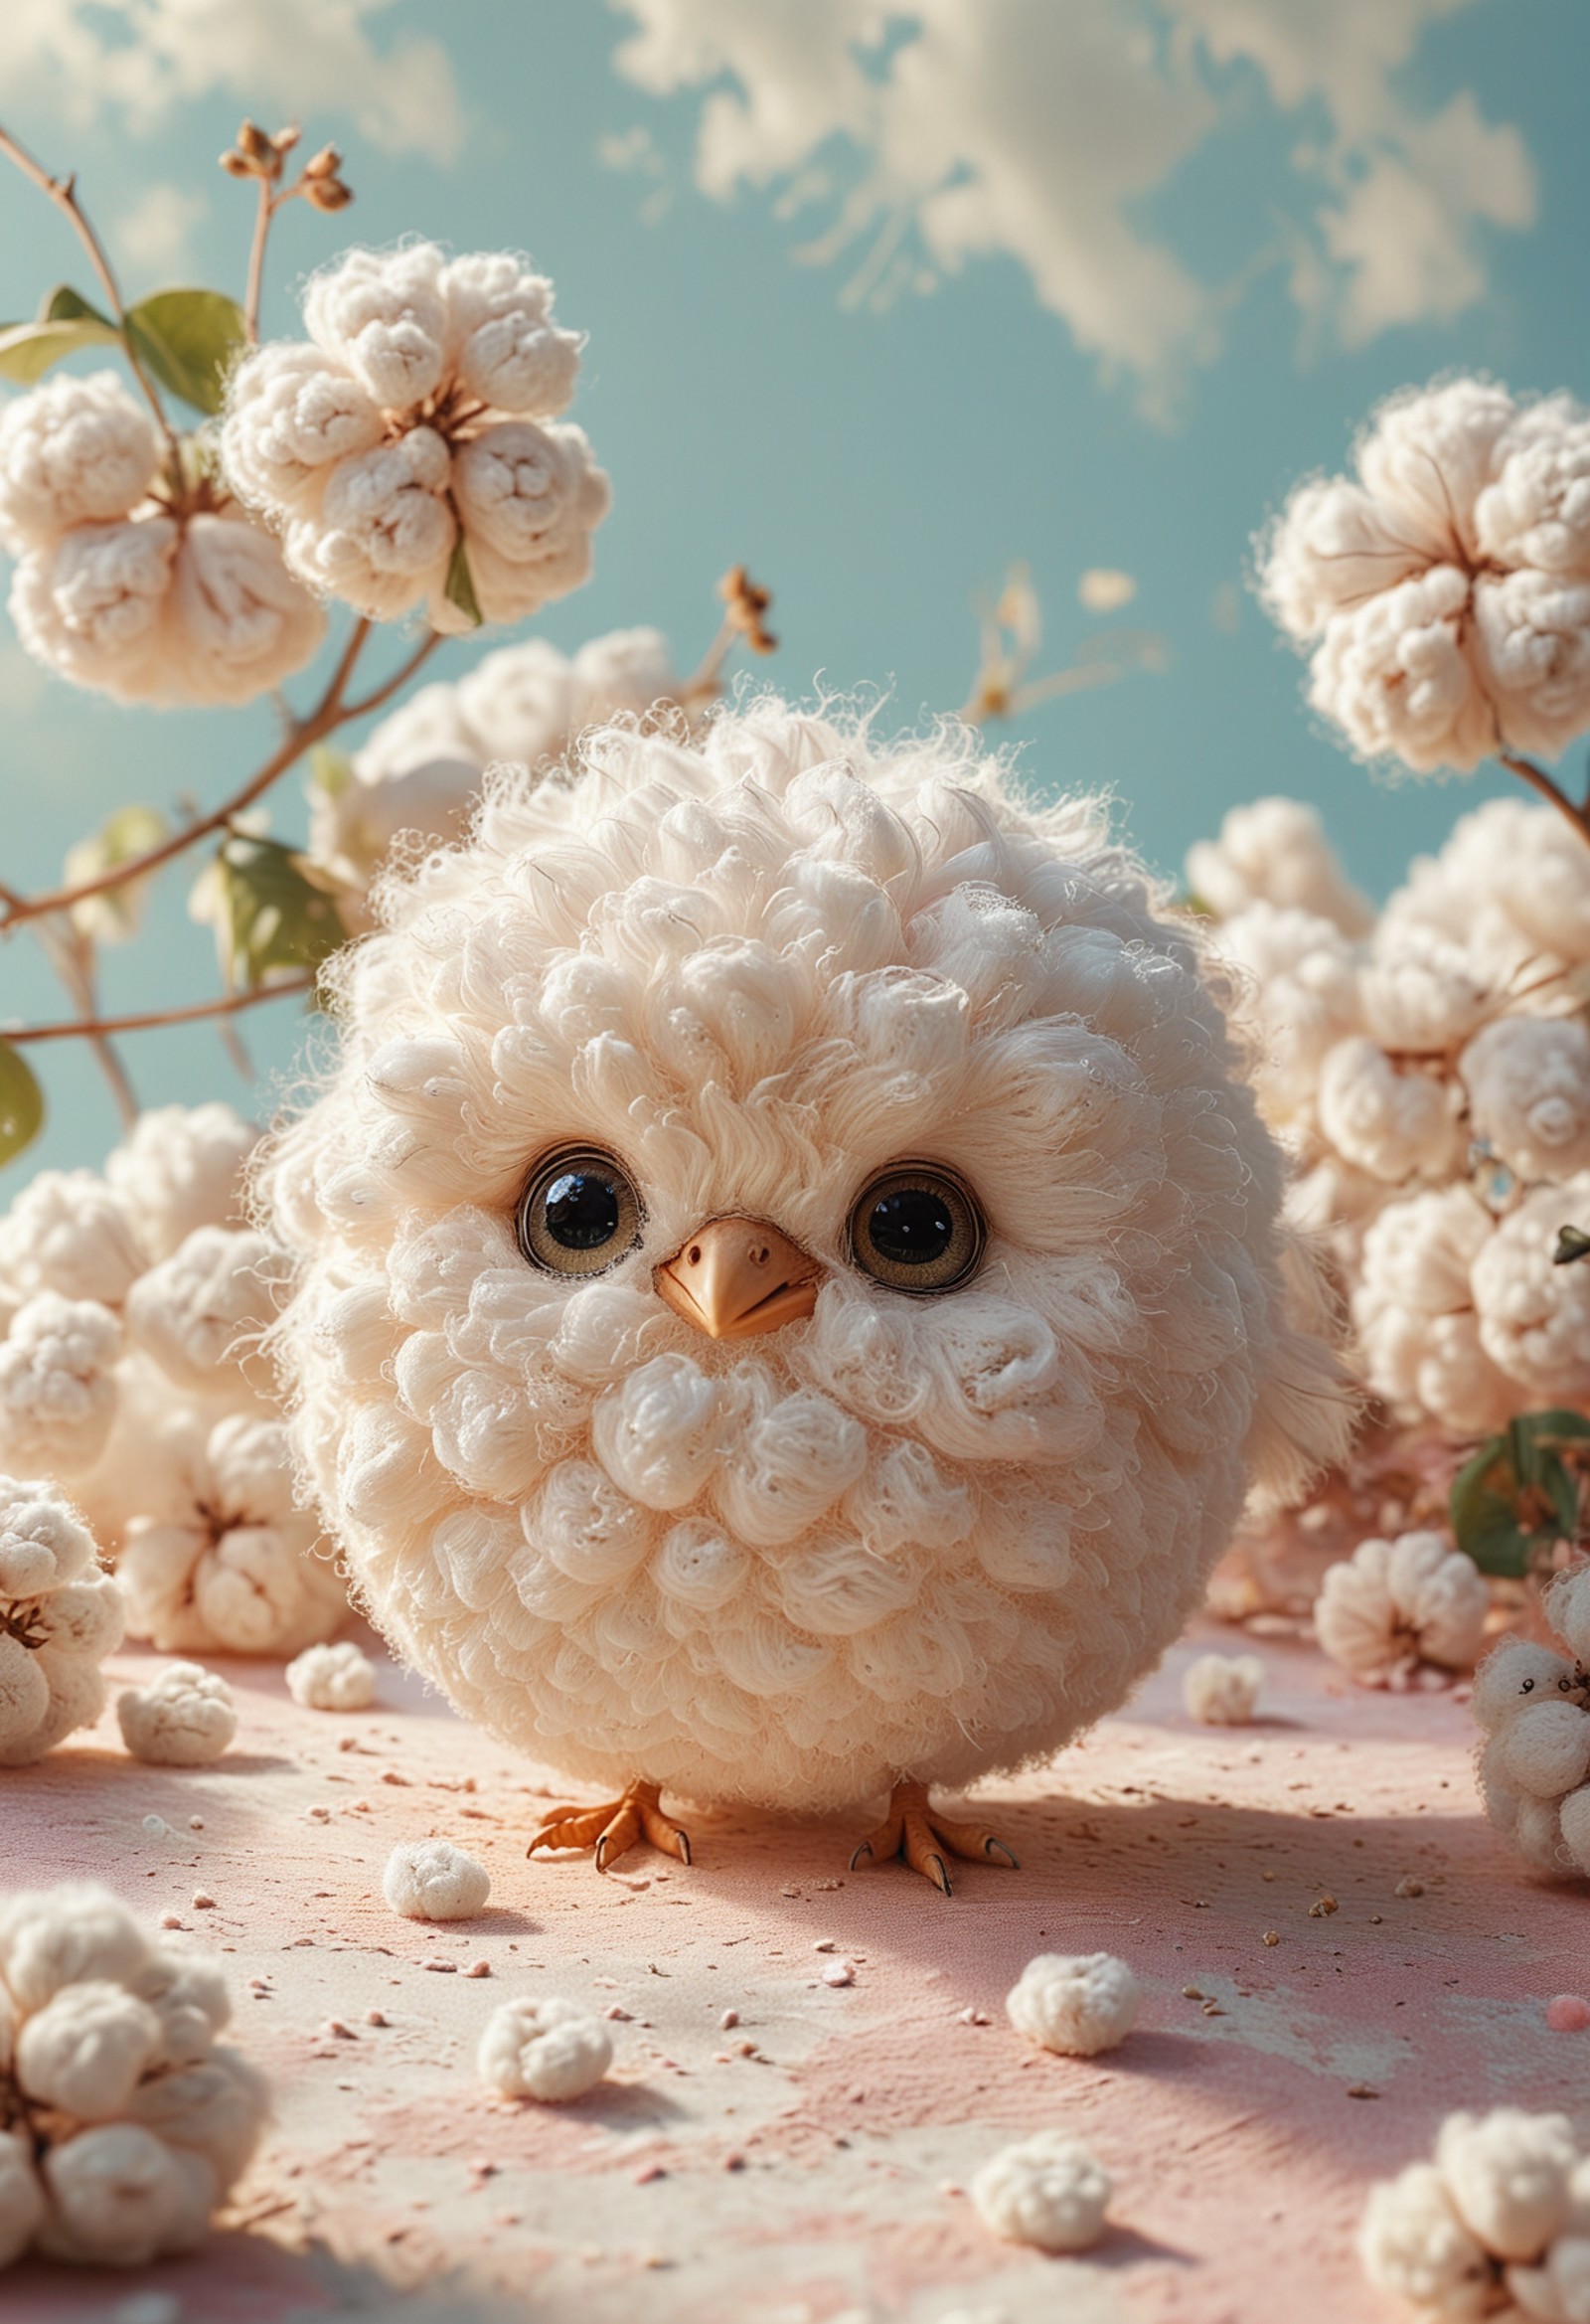 A small, fluffy chick surrounded by cotton-like flowers against a soft blue background. The chick resembles a miniature cloud, its large eyes and tiny beak add to its endearing quality. 